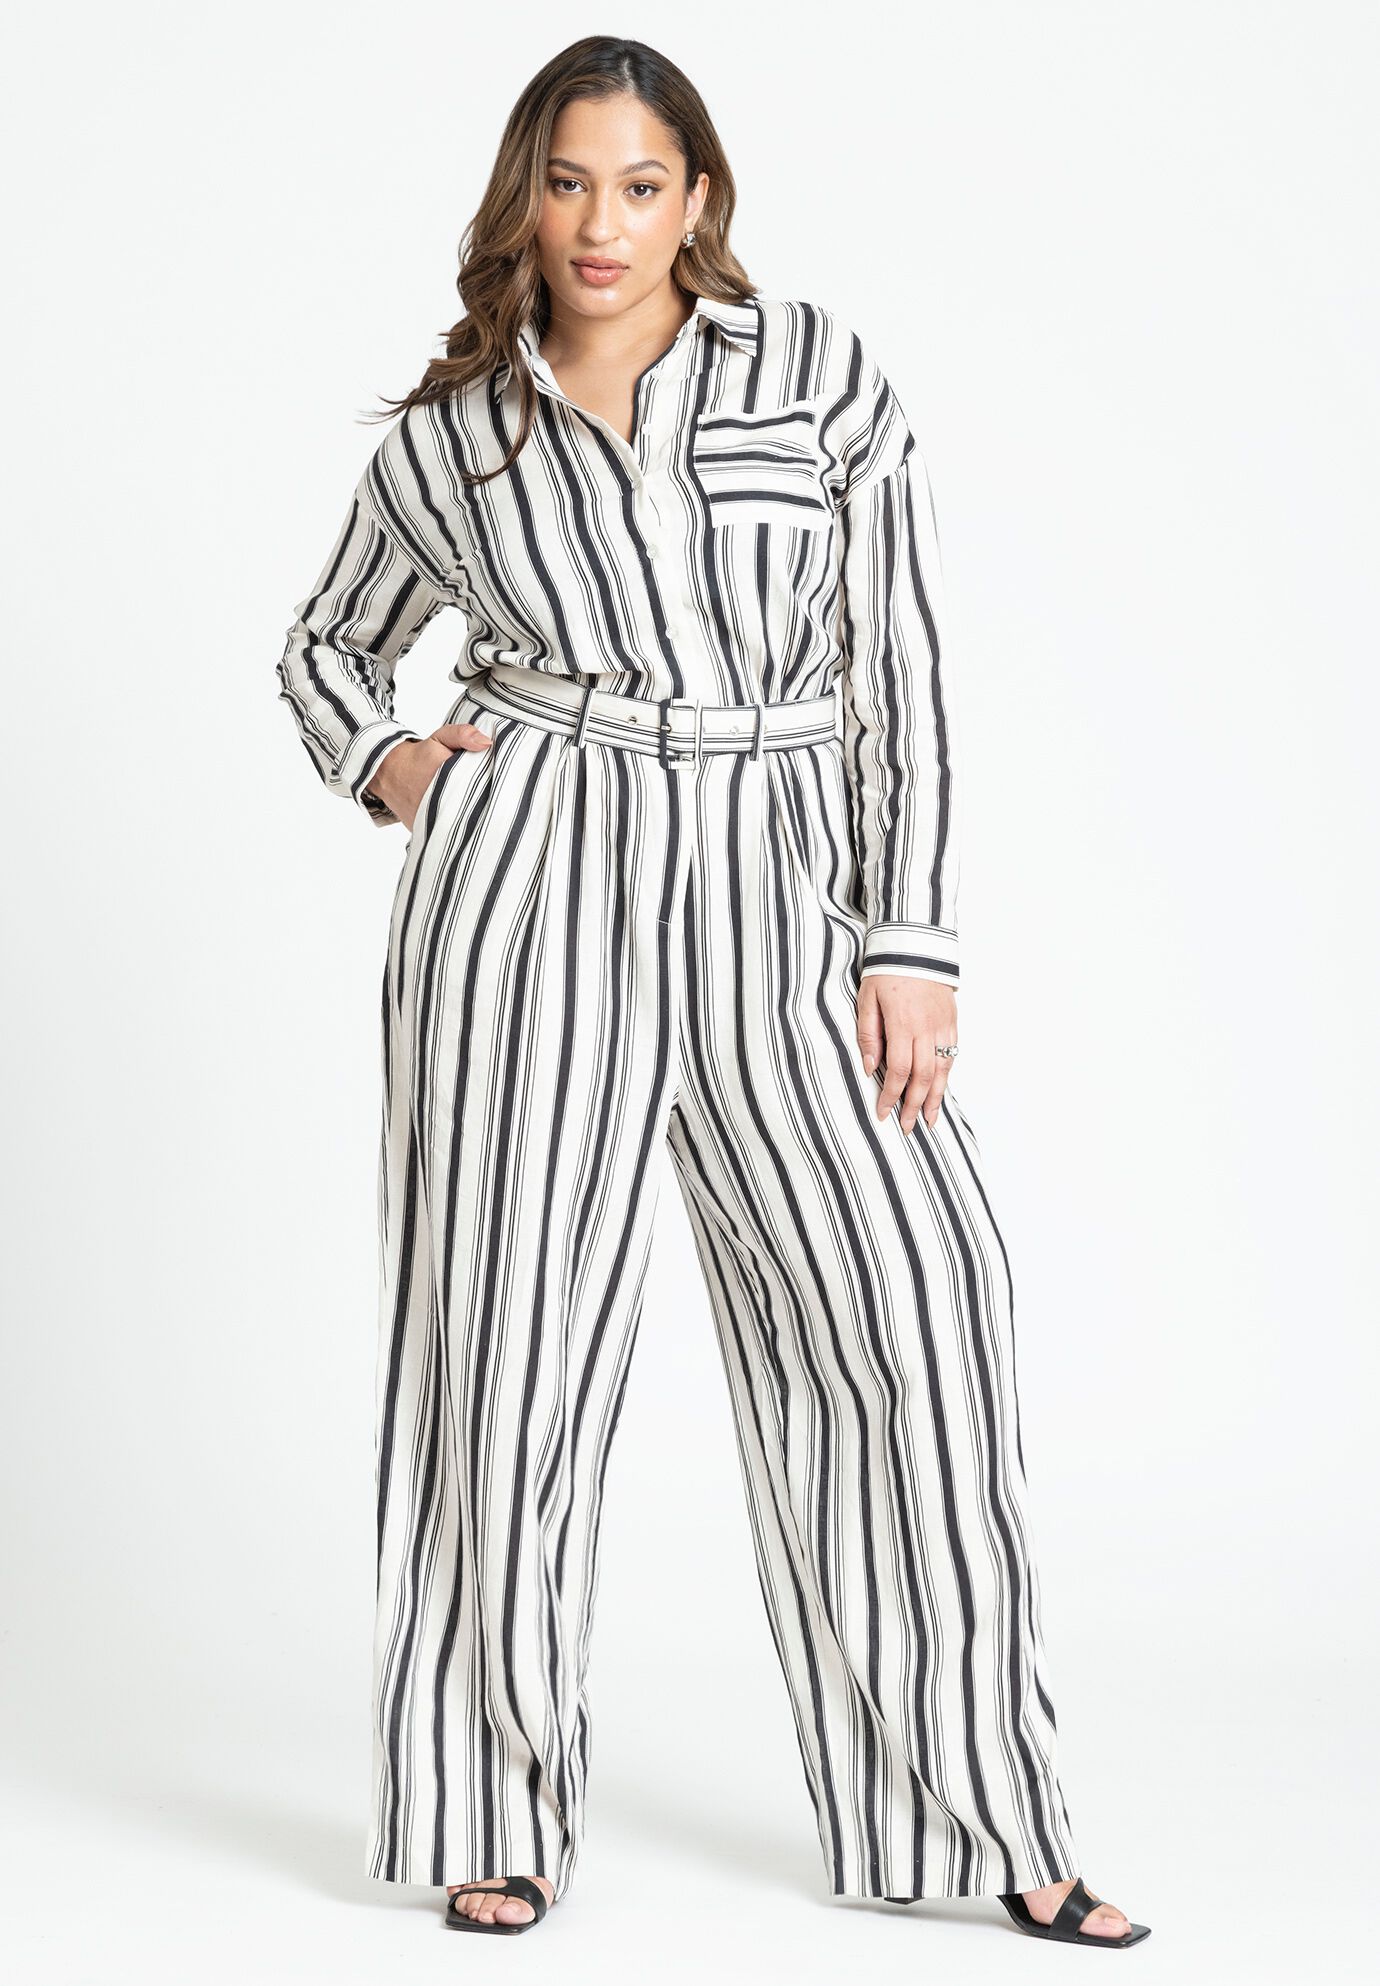 Plus Size Collared Floor Length Belted Pleated Pocketed Striped Print Long Sleeves Dropped Shoulder Jumpsuit